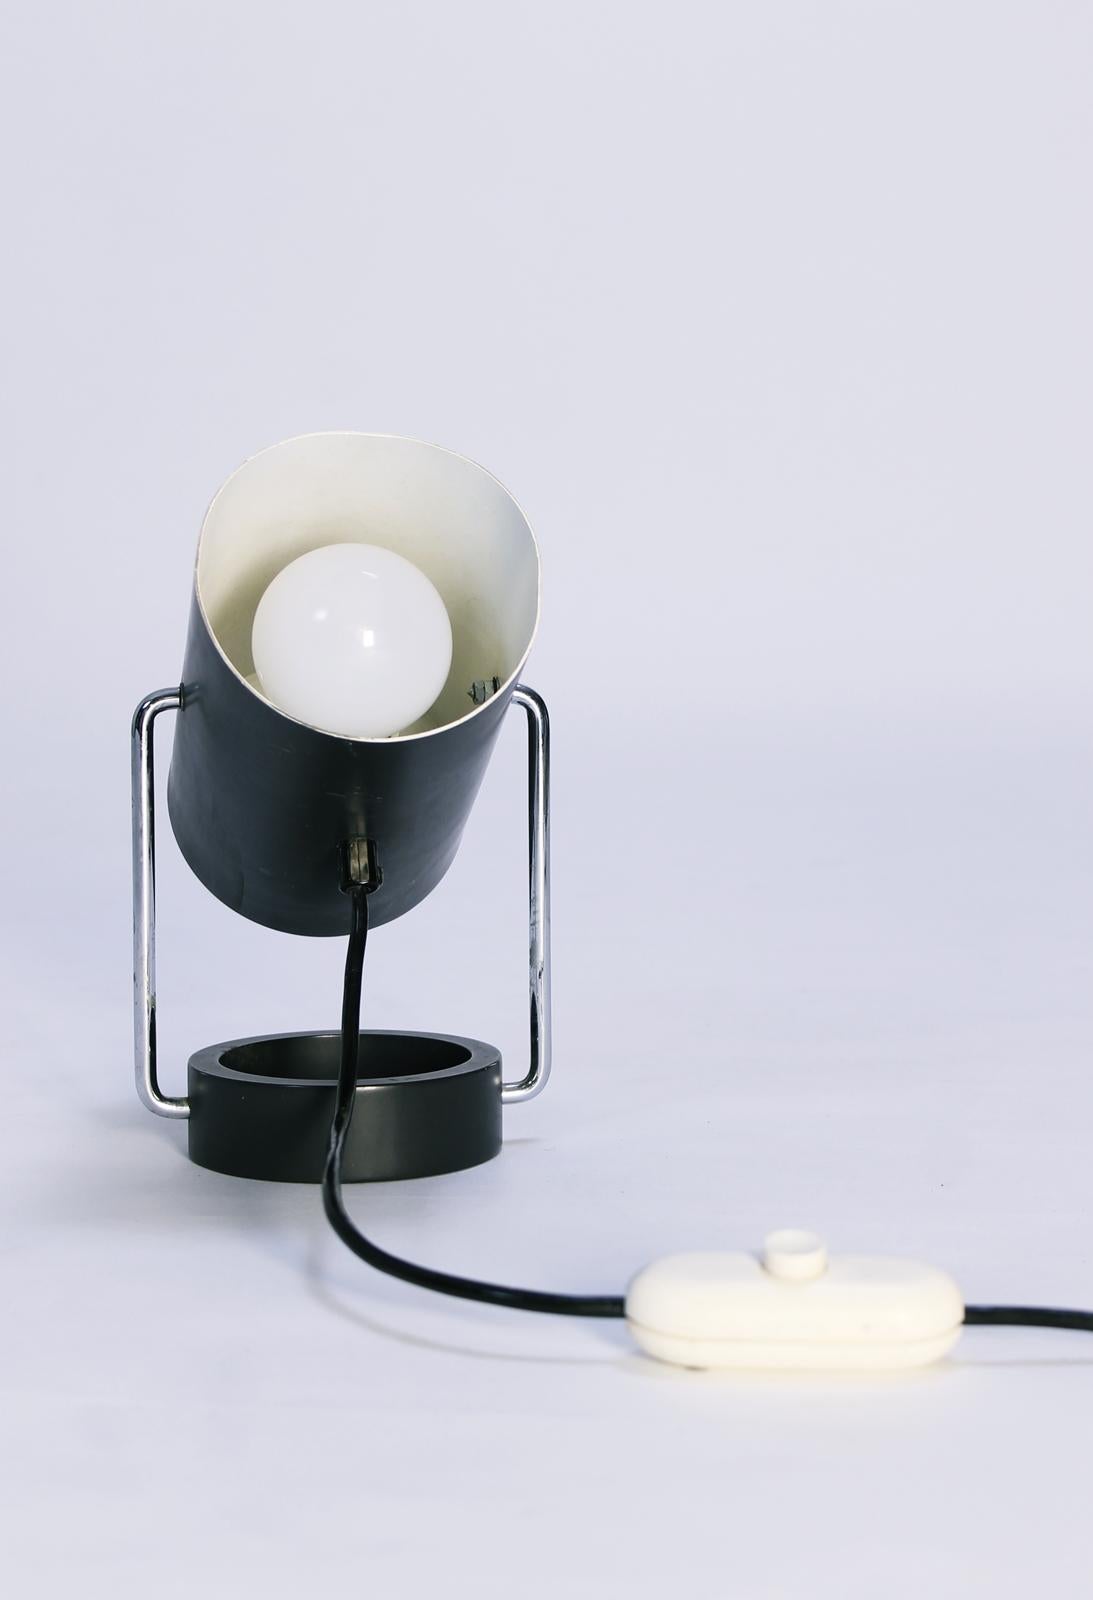 Metal Tubus Table Lamp by Tulux in Style of Baltensweiler Swiss, 1960s